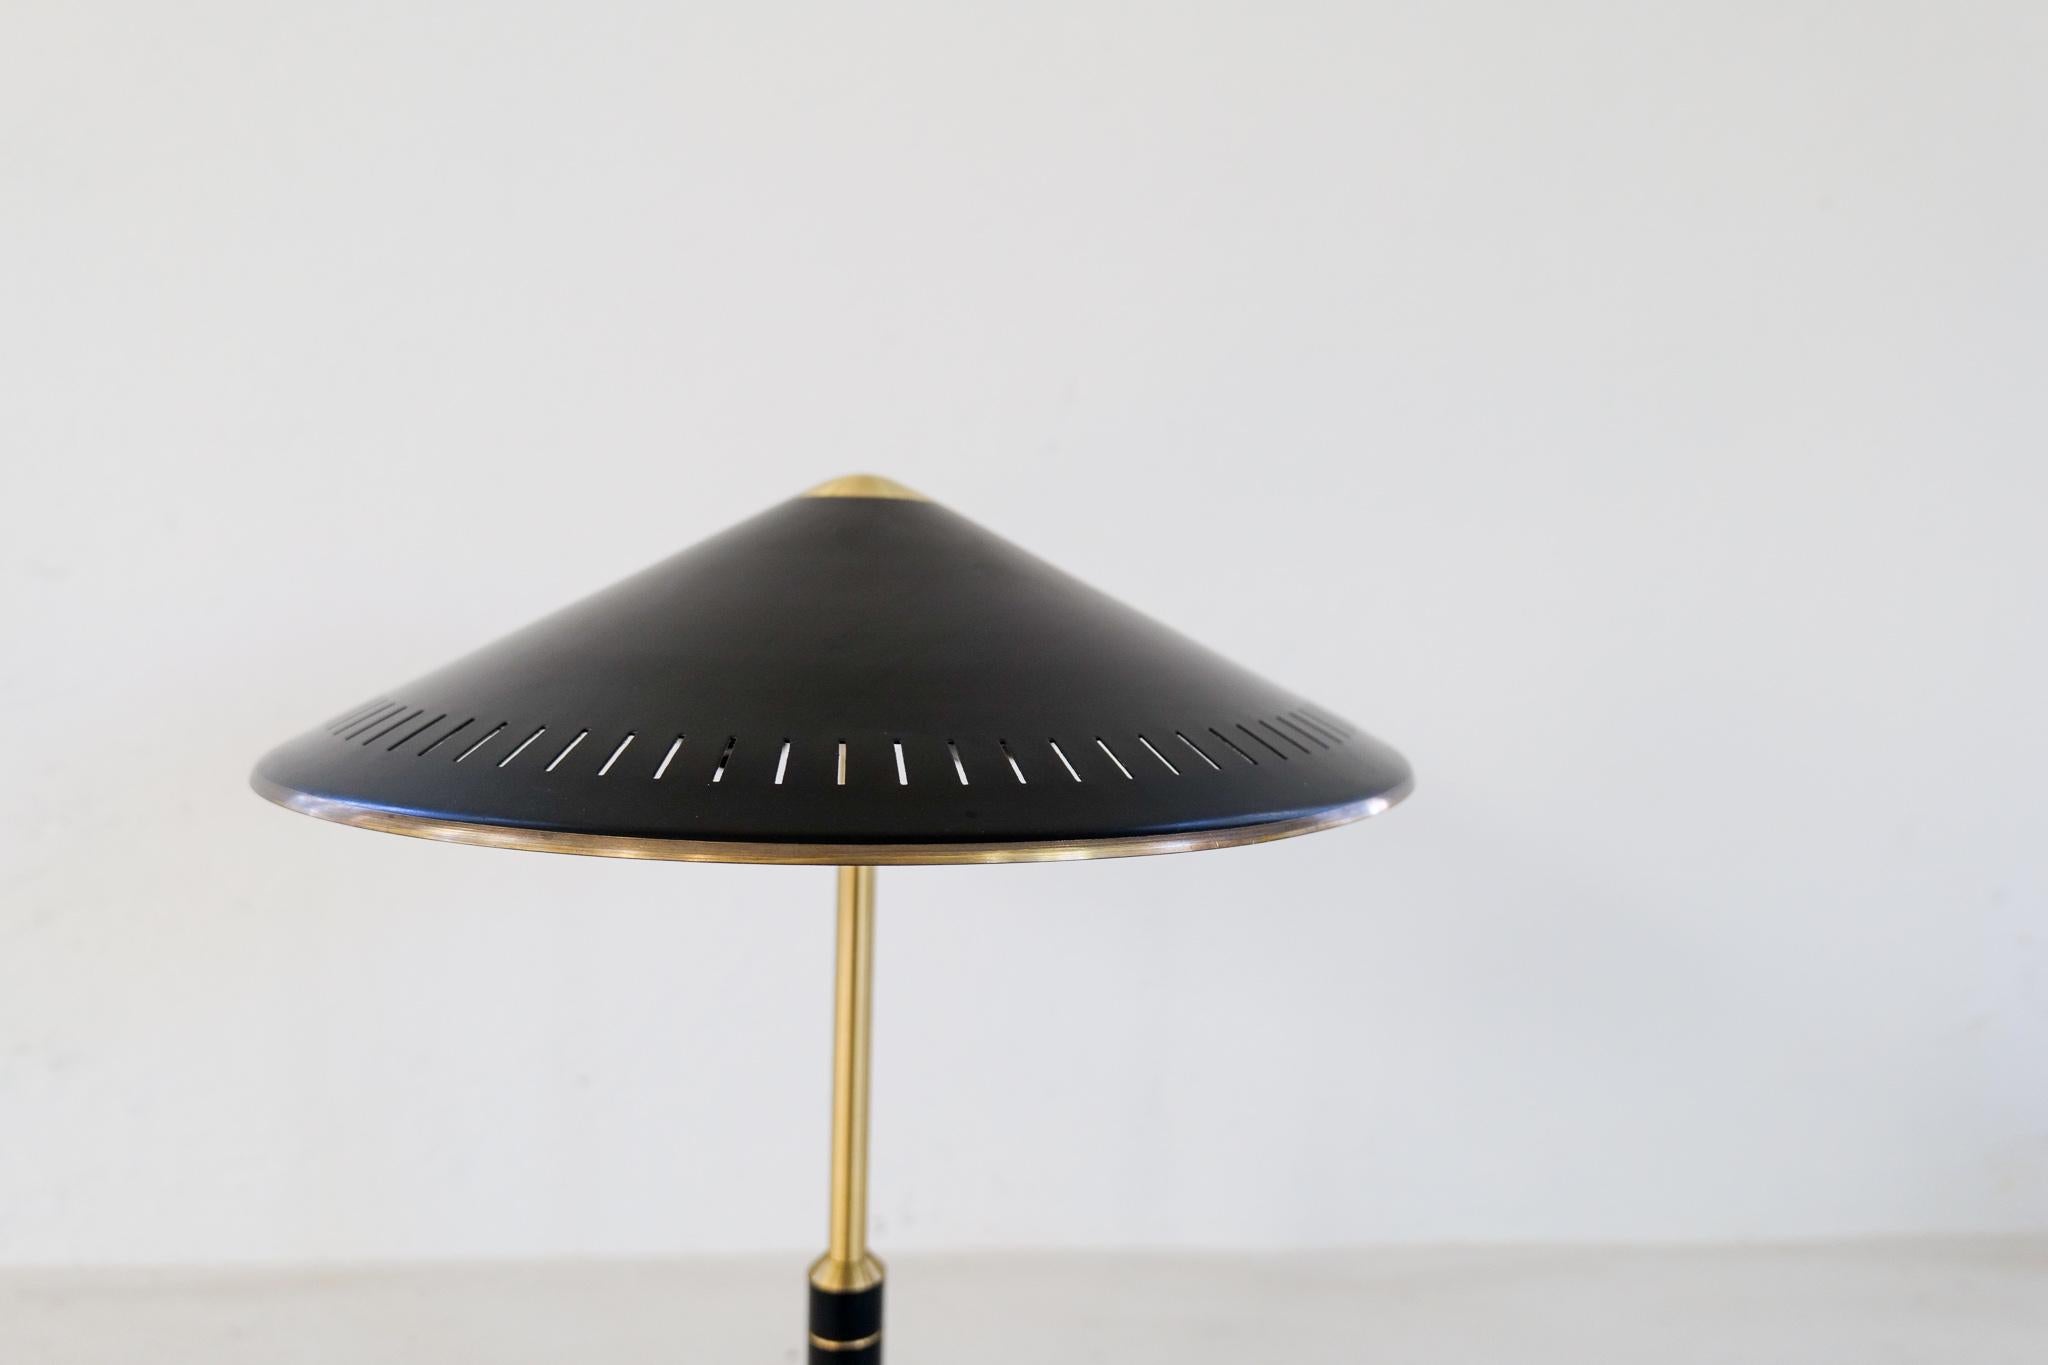 Midcentury Modern Table Lamp by Bent Karlby Produced by Lyfa in Denmark, 1956 For Sale 1